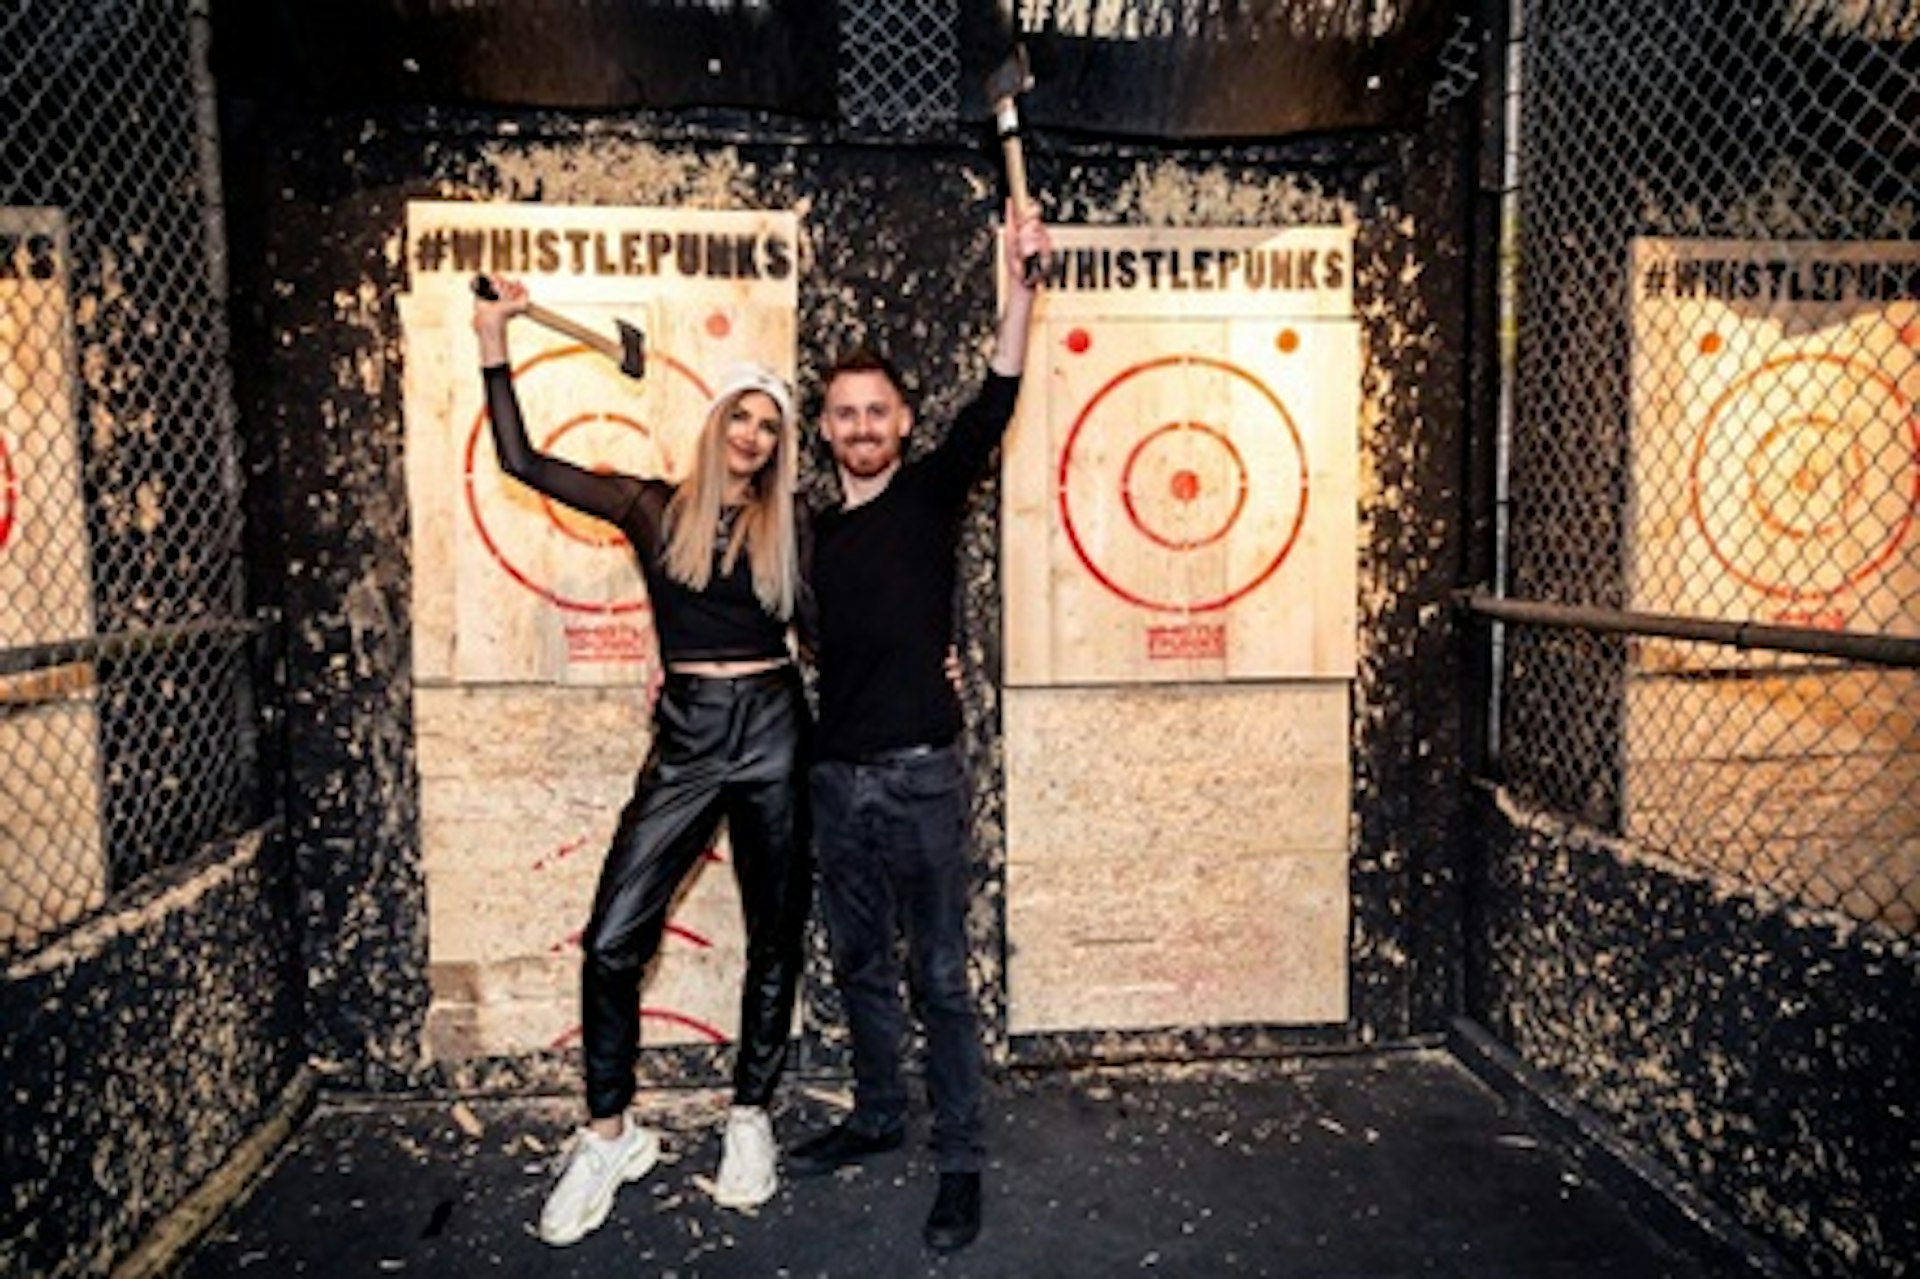 Urban Axe Throwing with a Beer for Two at Whistle Punks, Leeds, Manchester or Bristol 2